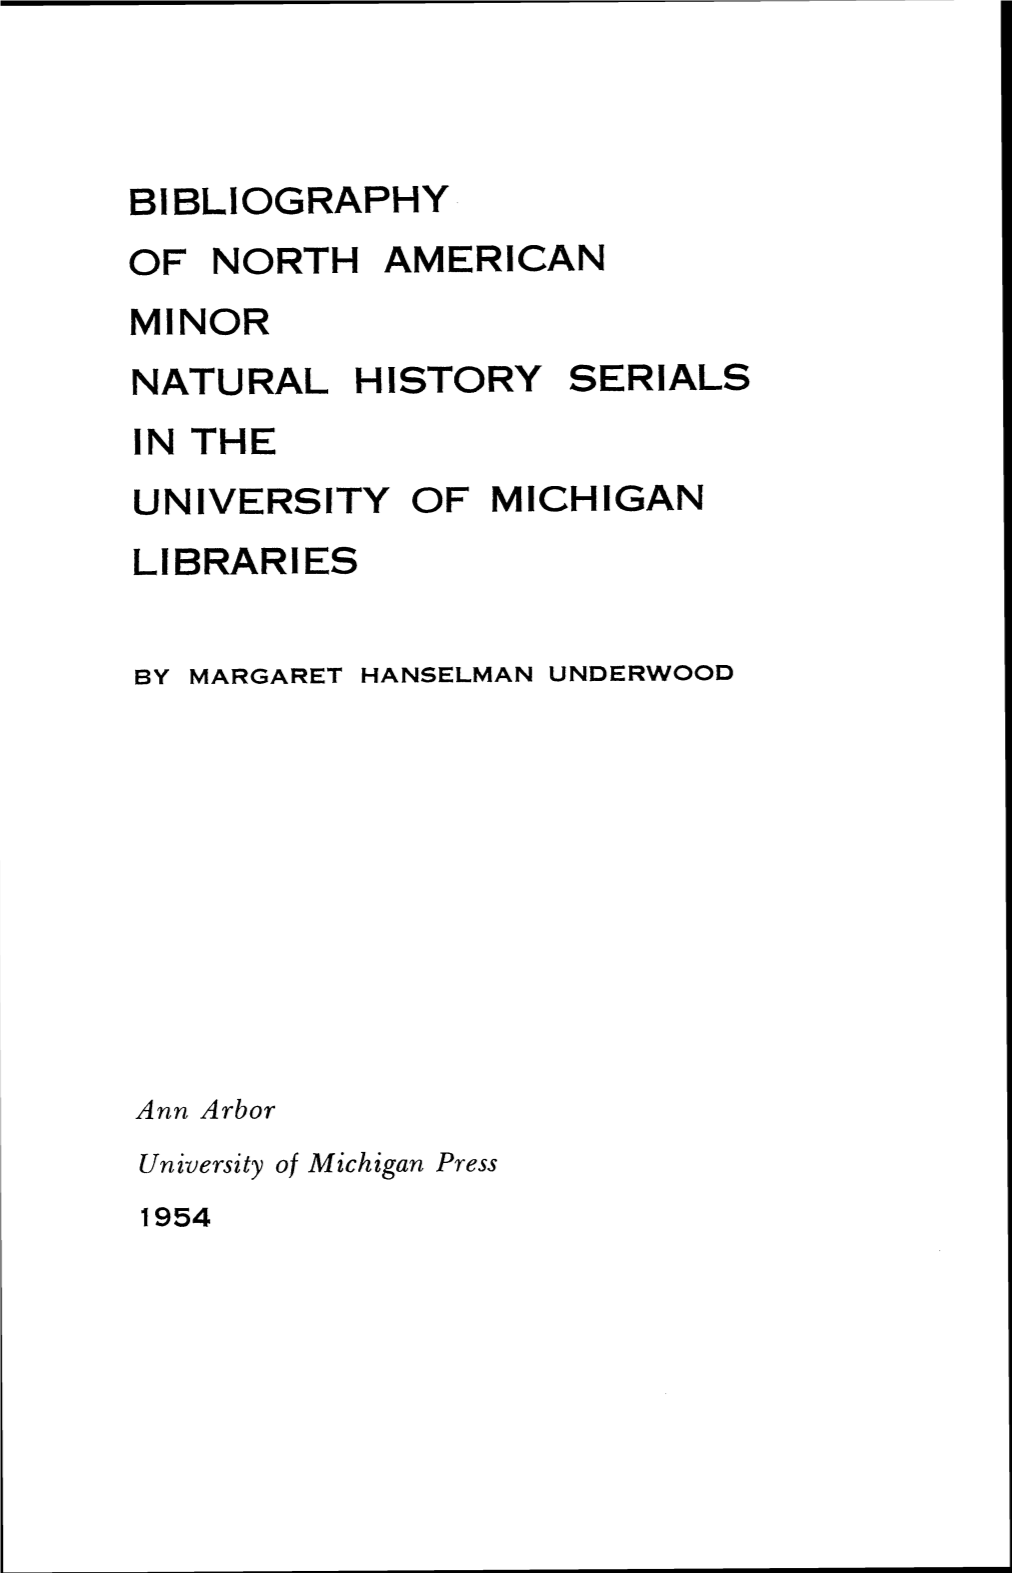 Bibliography of North American Minor Natural History Serials in the University of Michigan Libraries